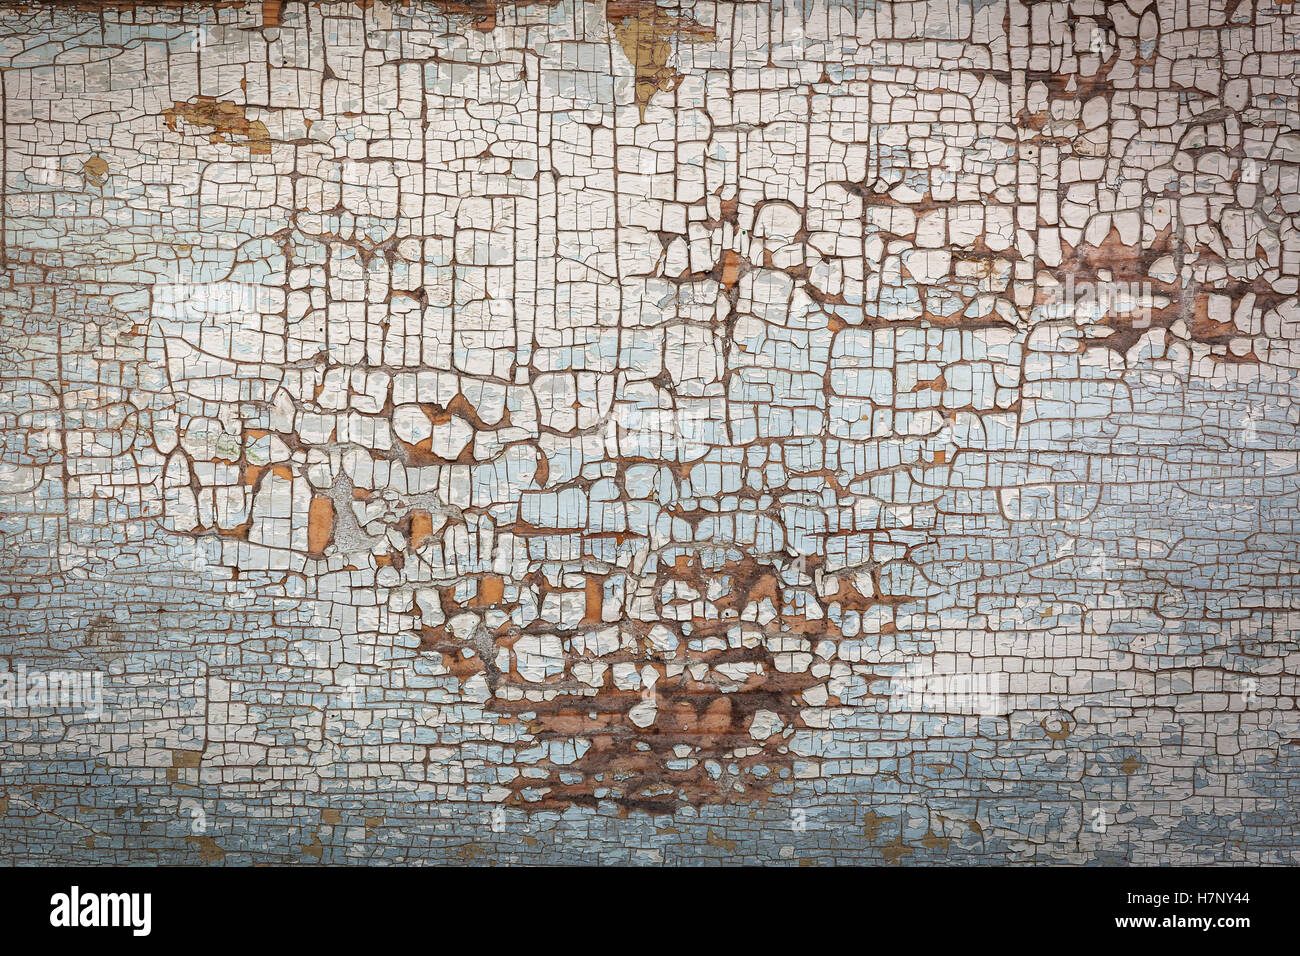 Peeling Paint On The Wall Old Wall Texture Wood Texture